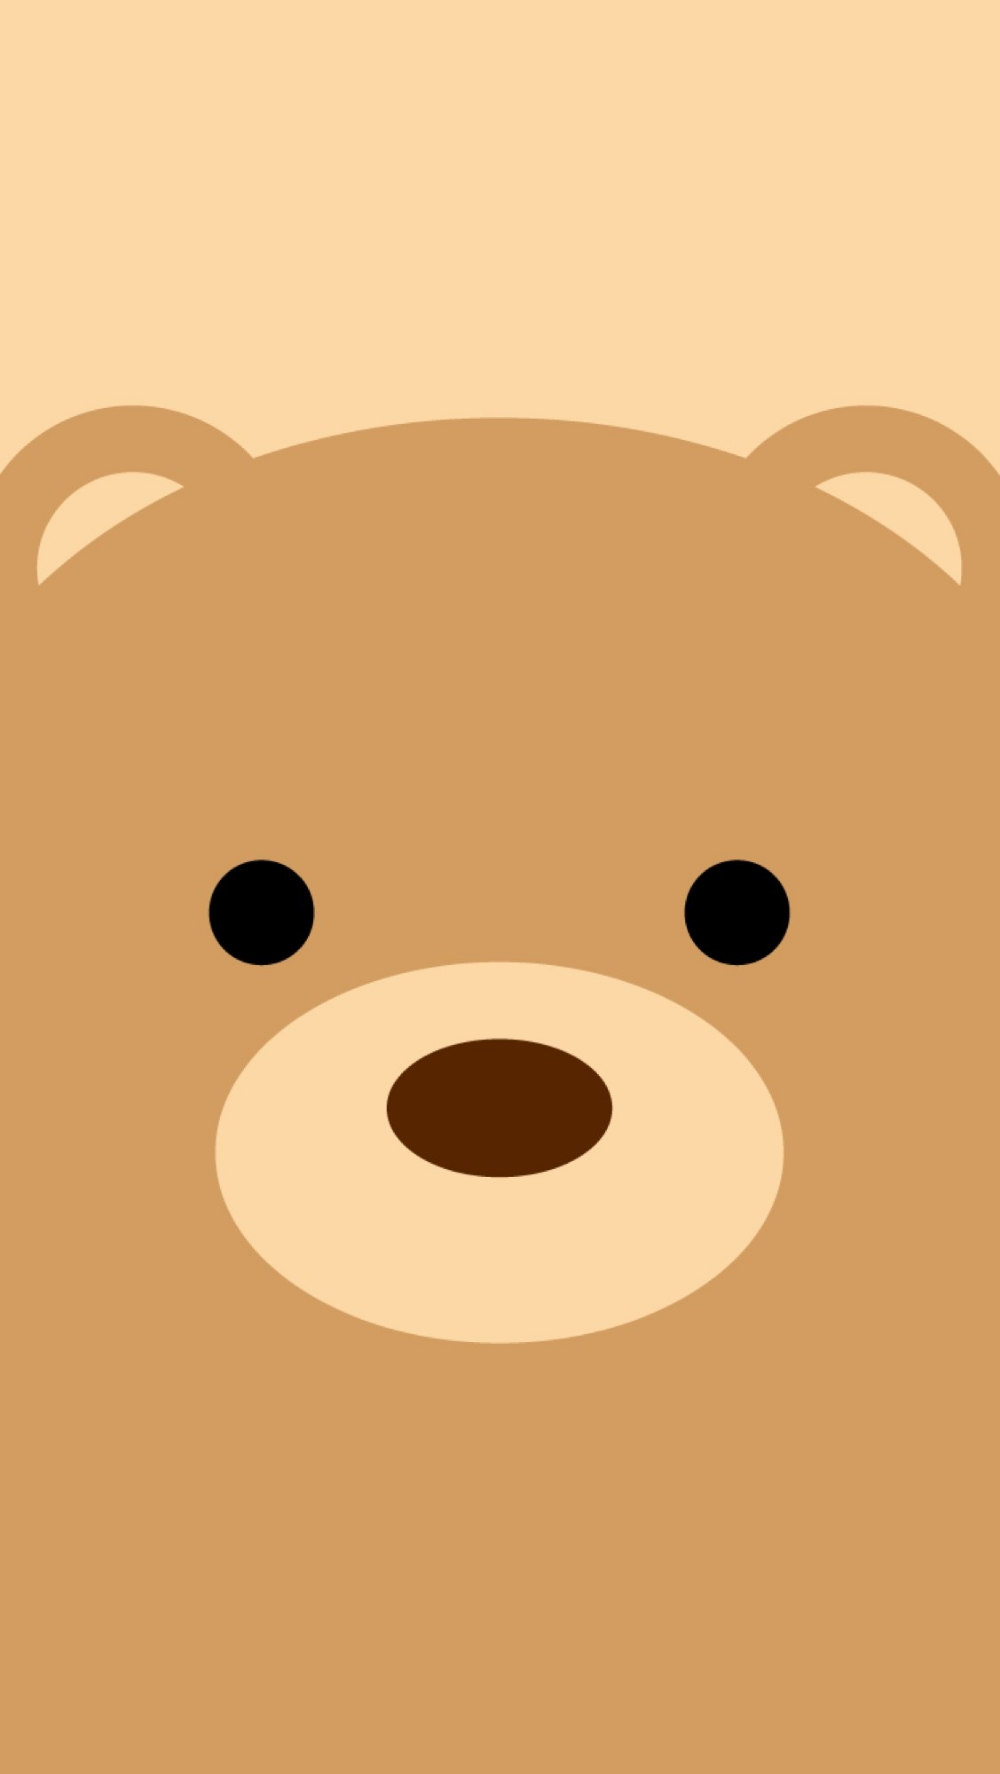 Anime Teddy Bear Wallpapers - Wallpaper Cave